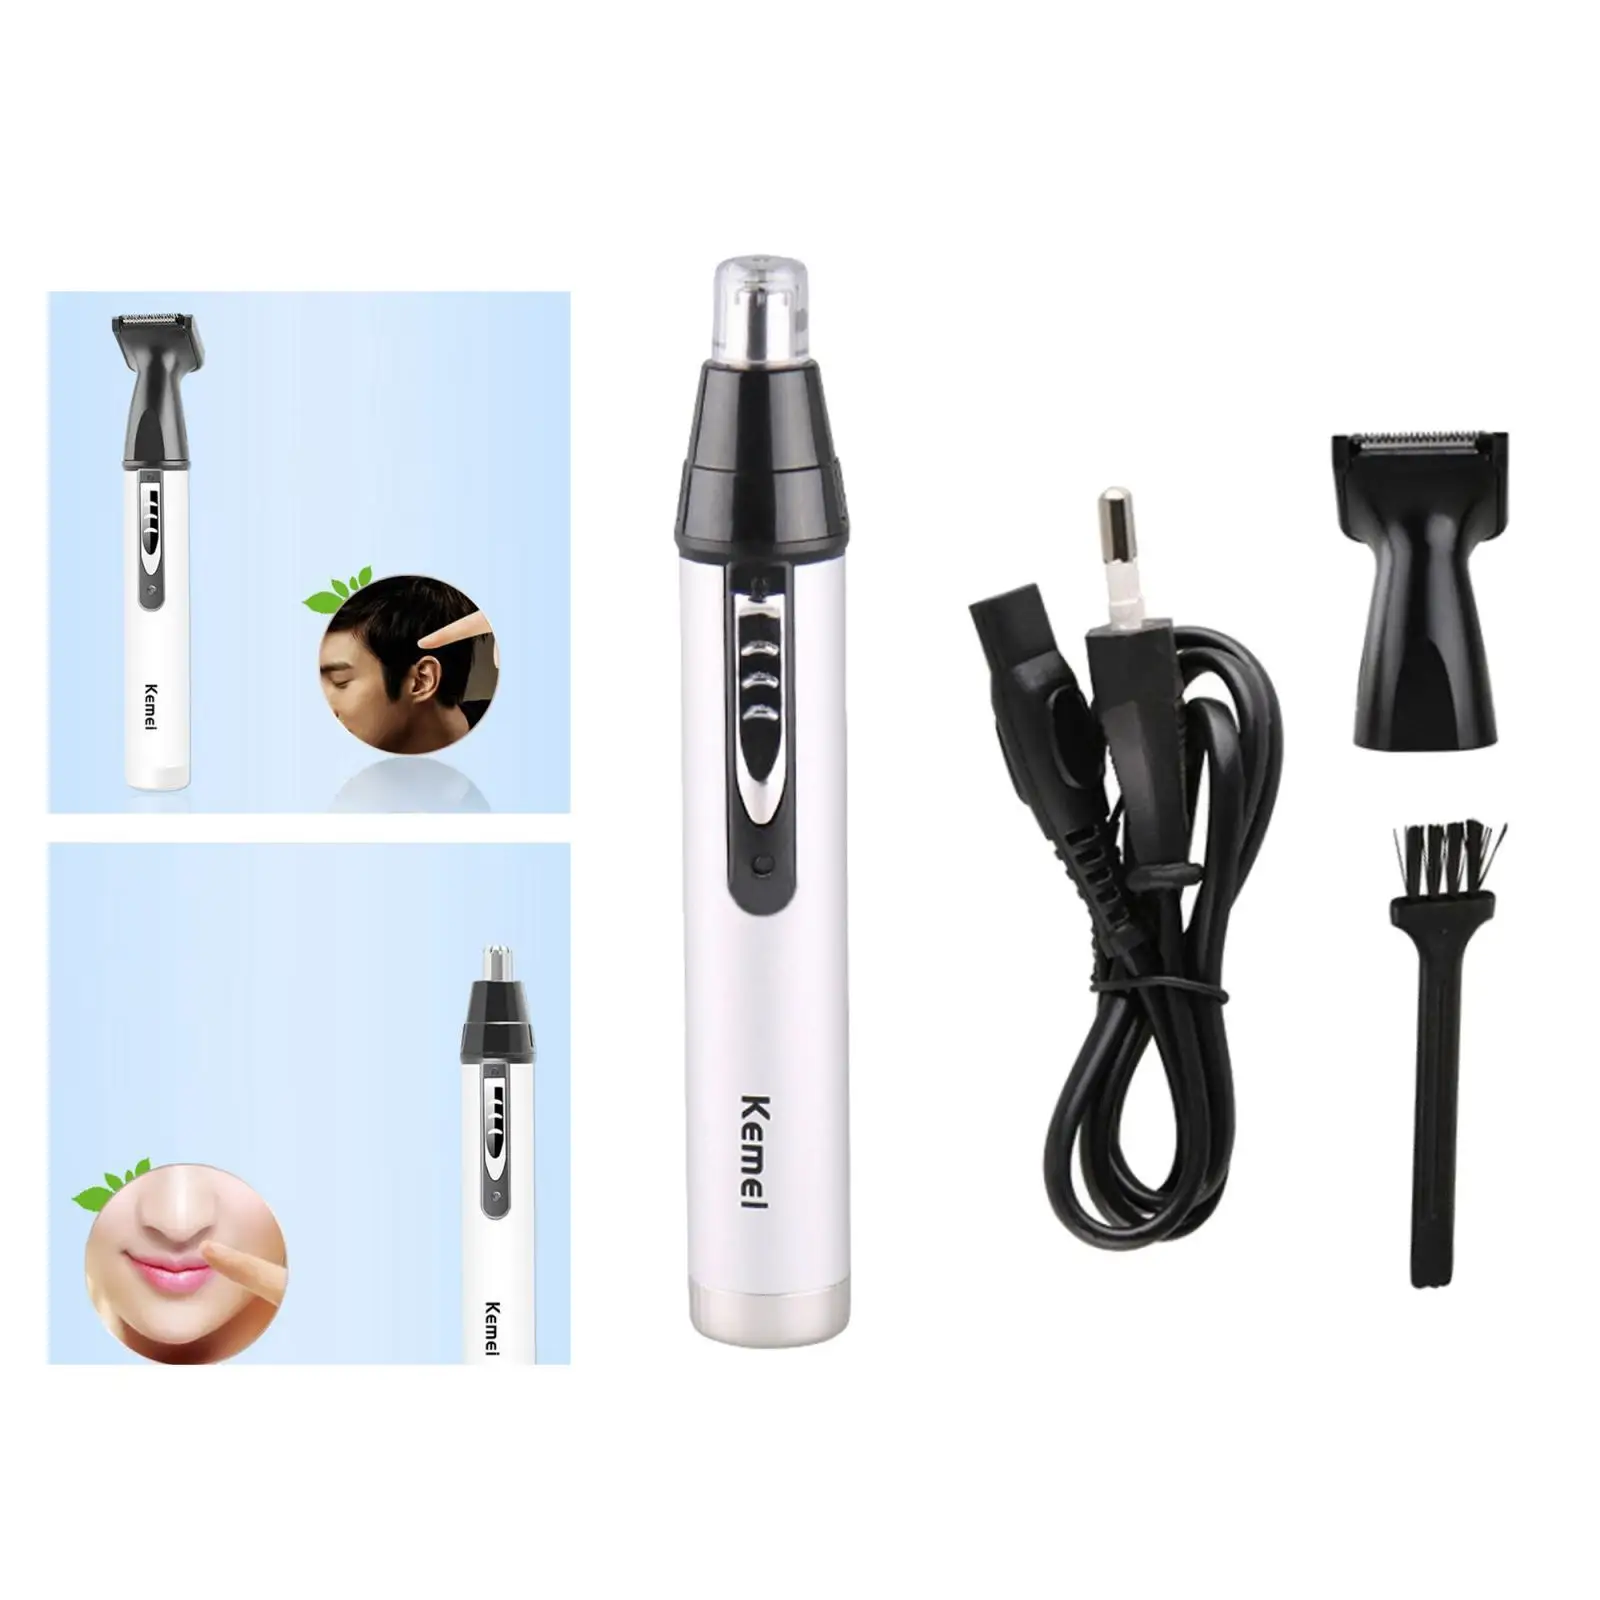 Painless Facial Ear and Nose Hair Trimmer Dual Edge for Men and Women